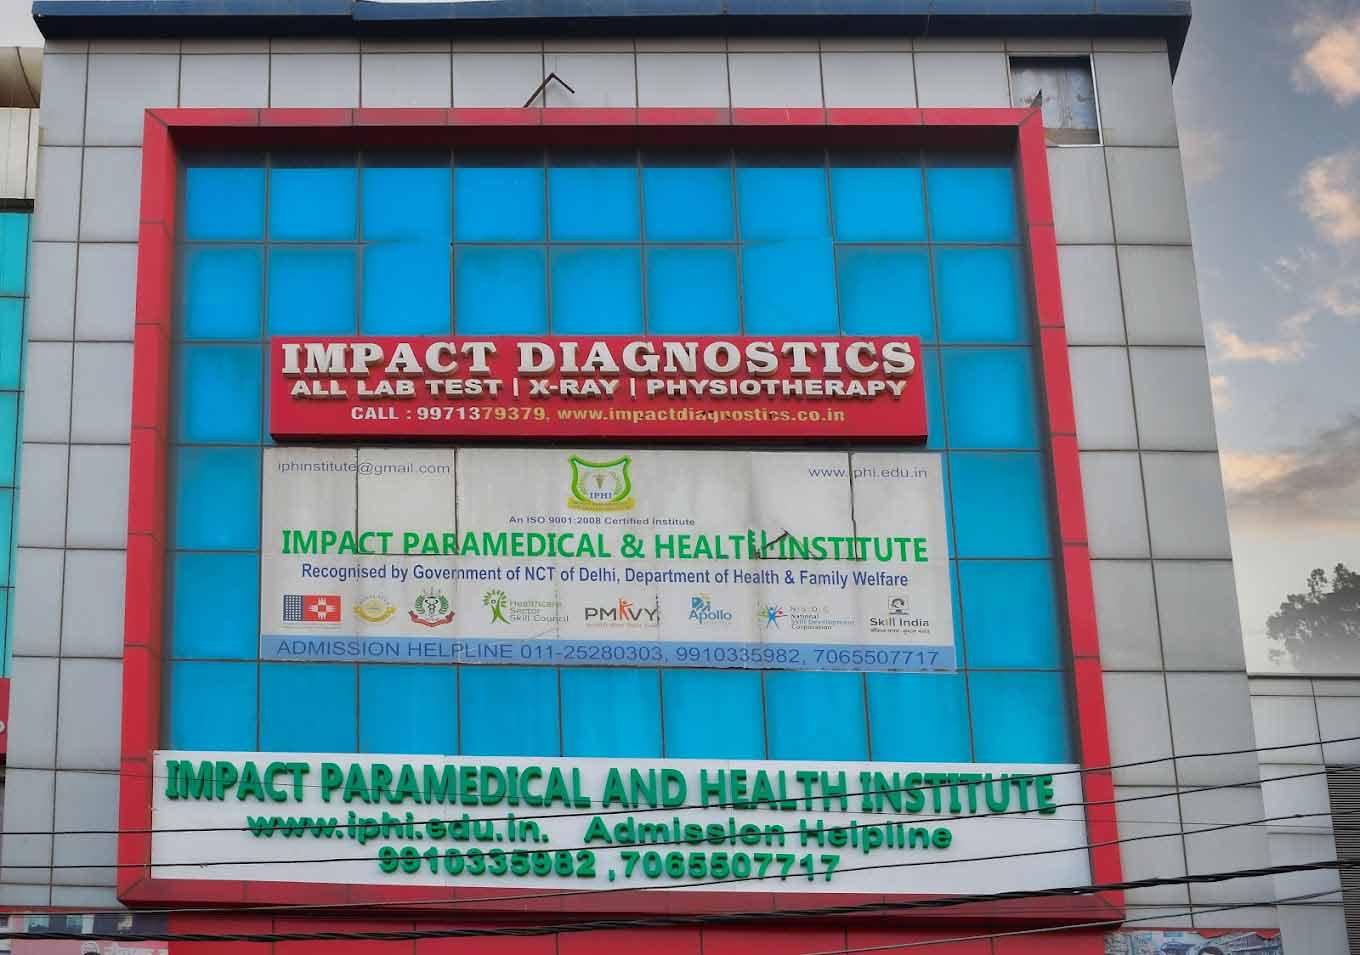 IMPACT PARAMEDICAL AND HEALTH INSTITUTE